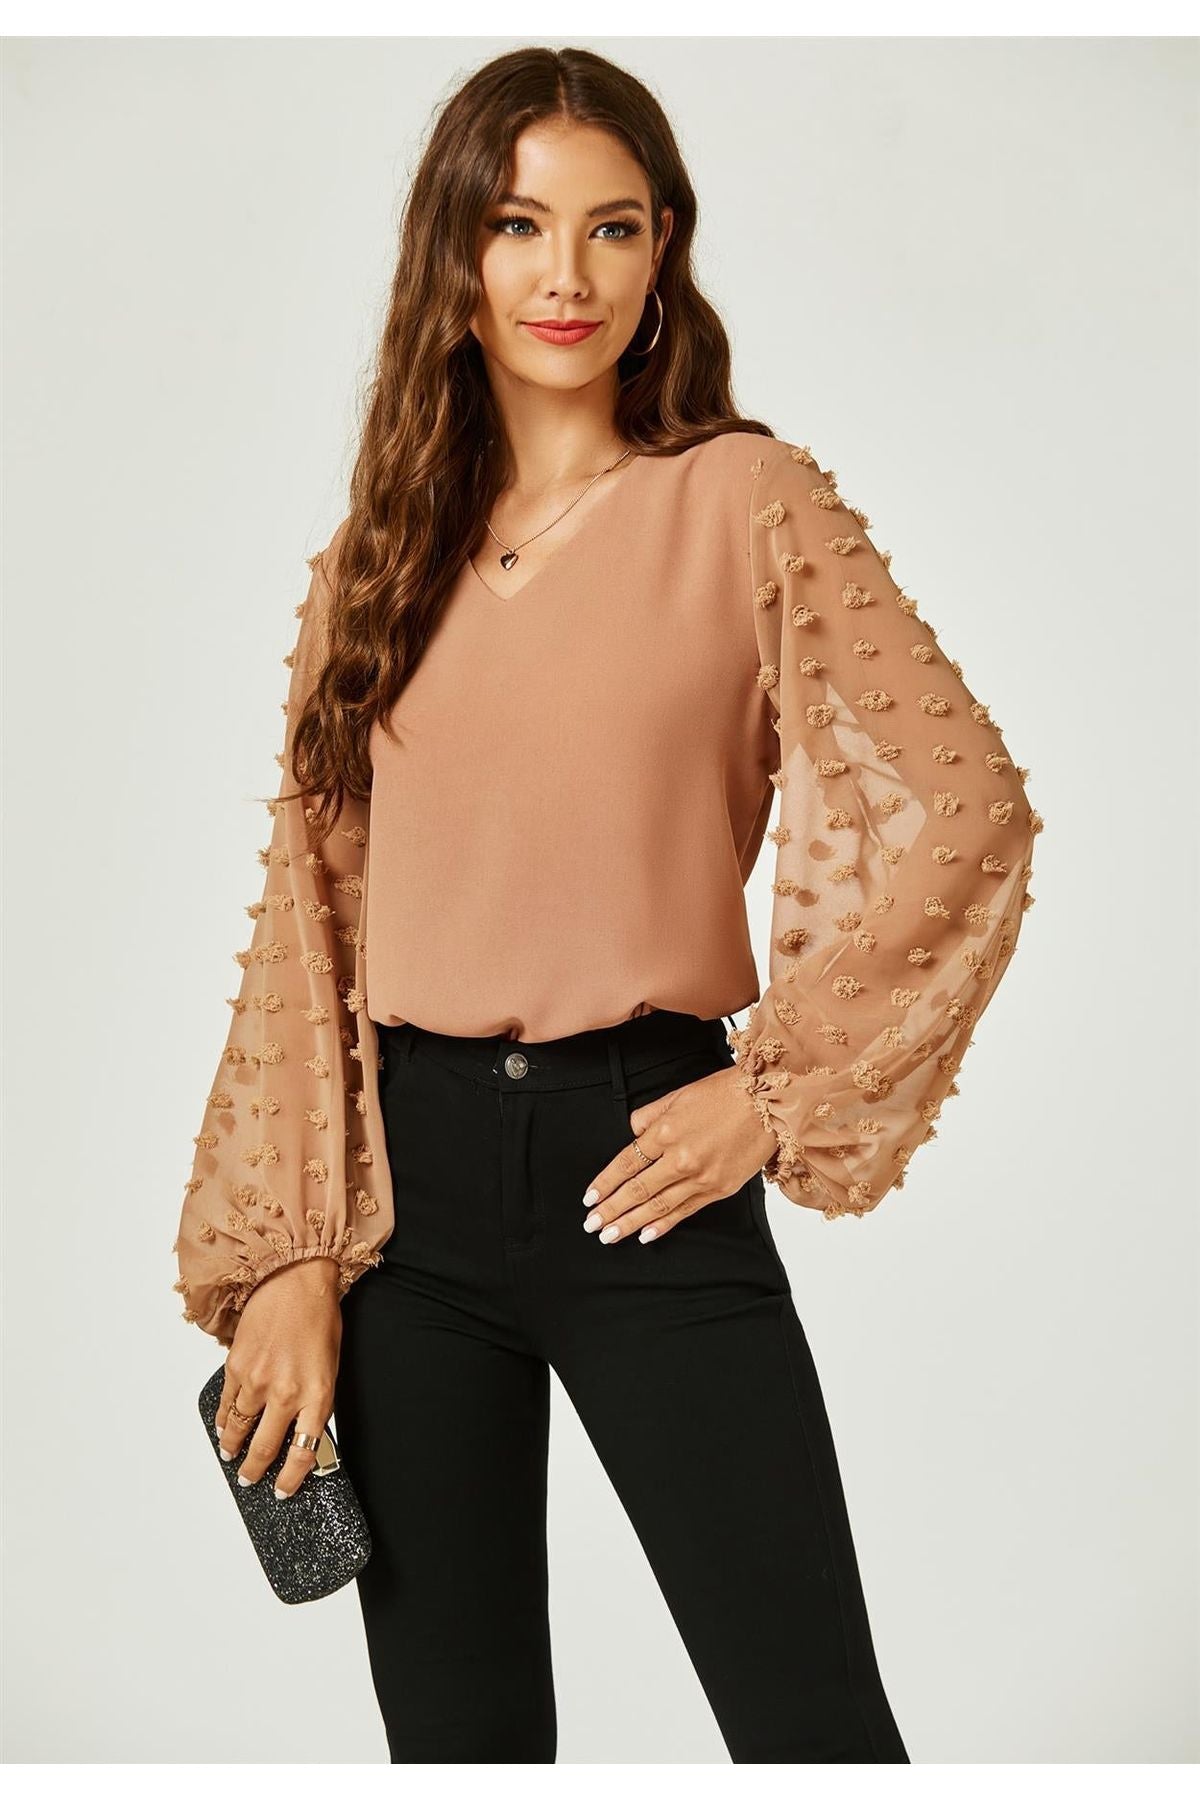 Lace Long Sleeve V Neck Top Blouse In Camel FS502